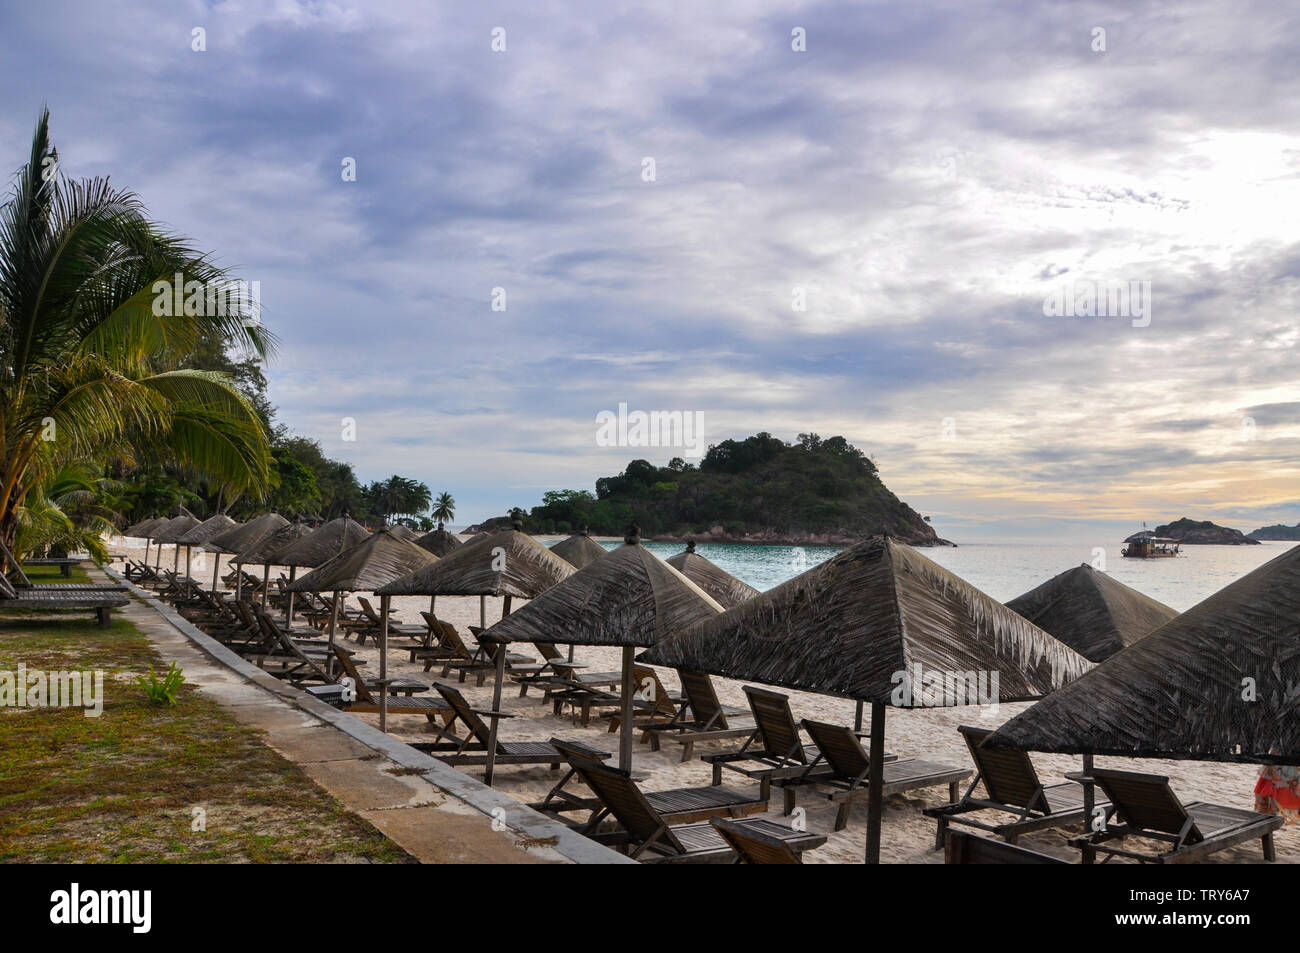 View of the Laguna Redang Island Resort. The resort is located on one of the best beaches on Redang Island. Stock Photo